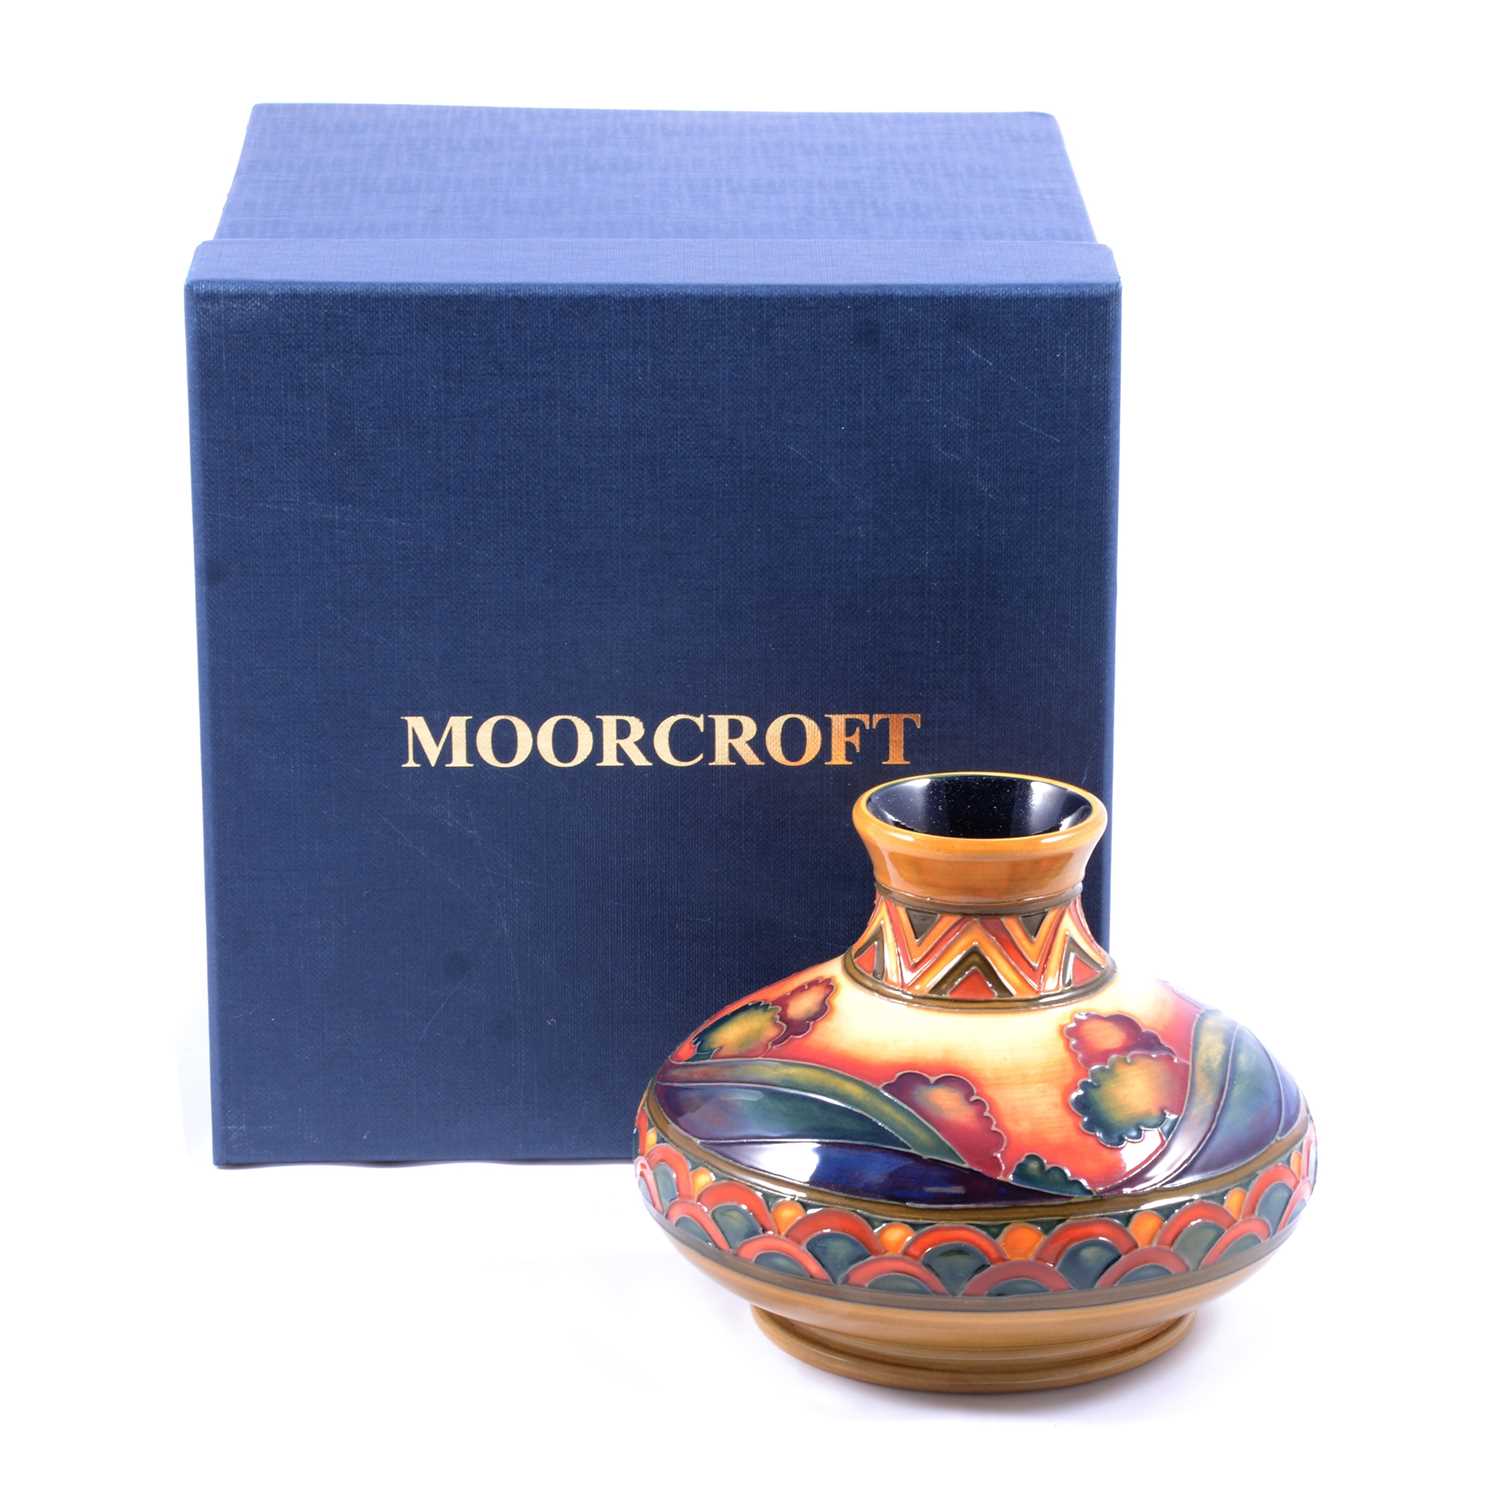 Lot 1 - Kerry Goodwin for Moorcroft, a vase in the Second Dawn Eventide design.